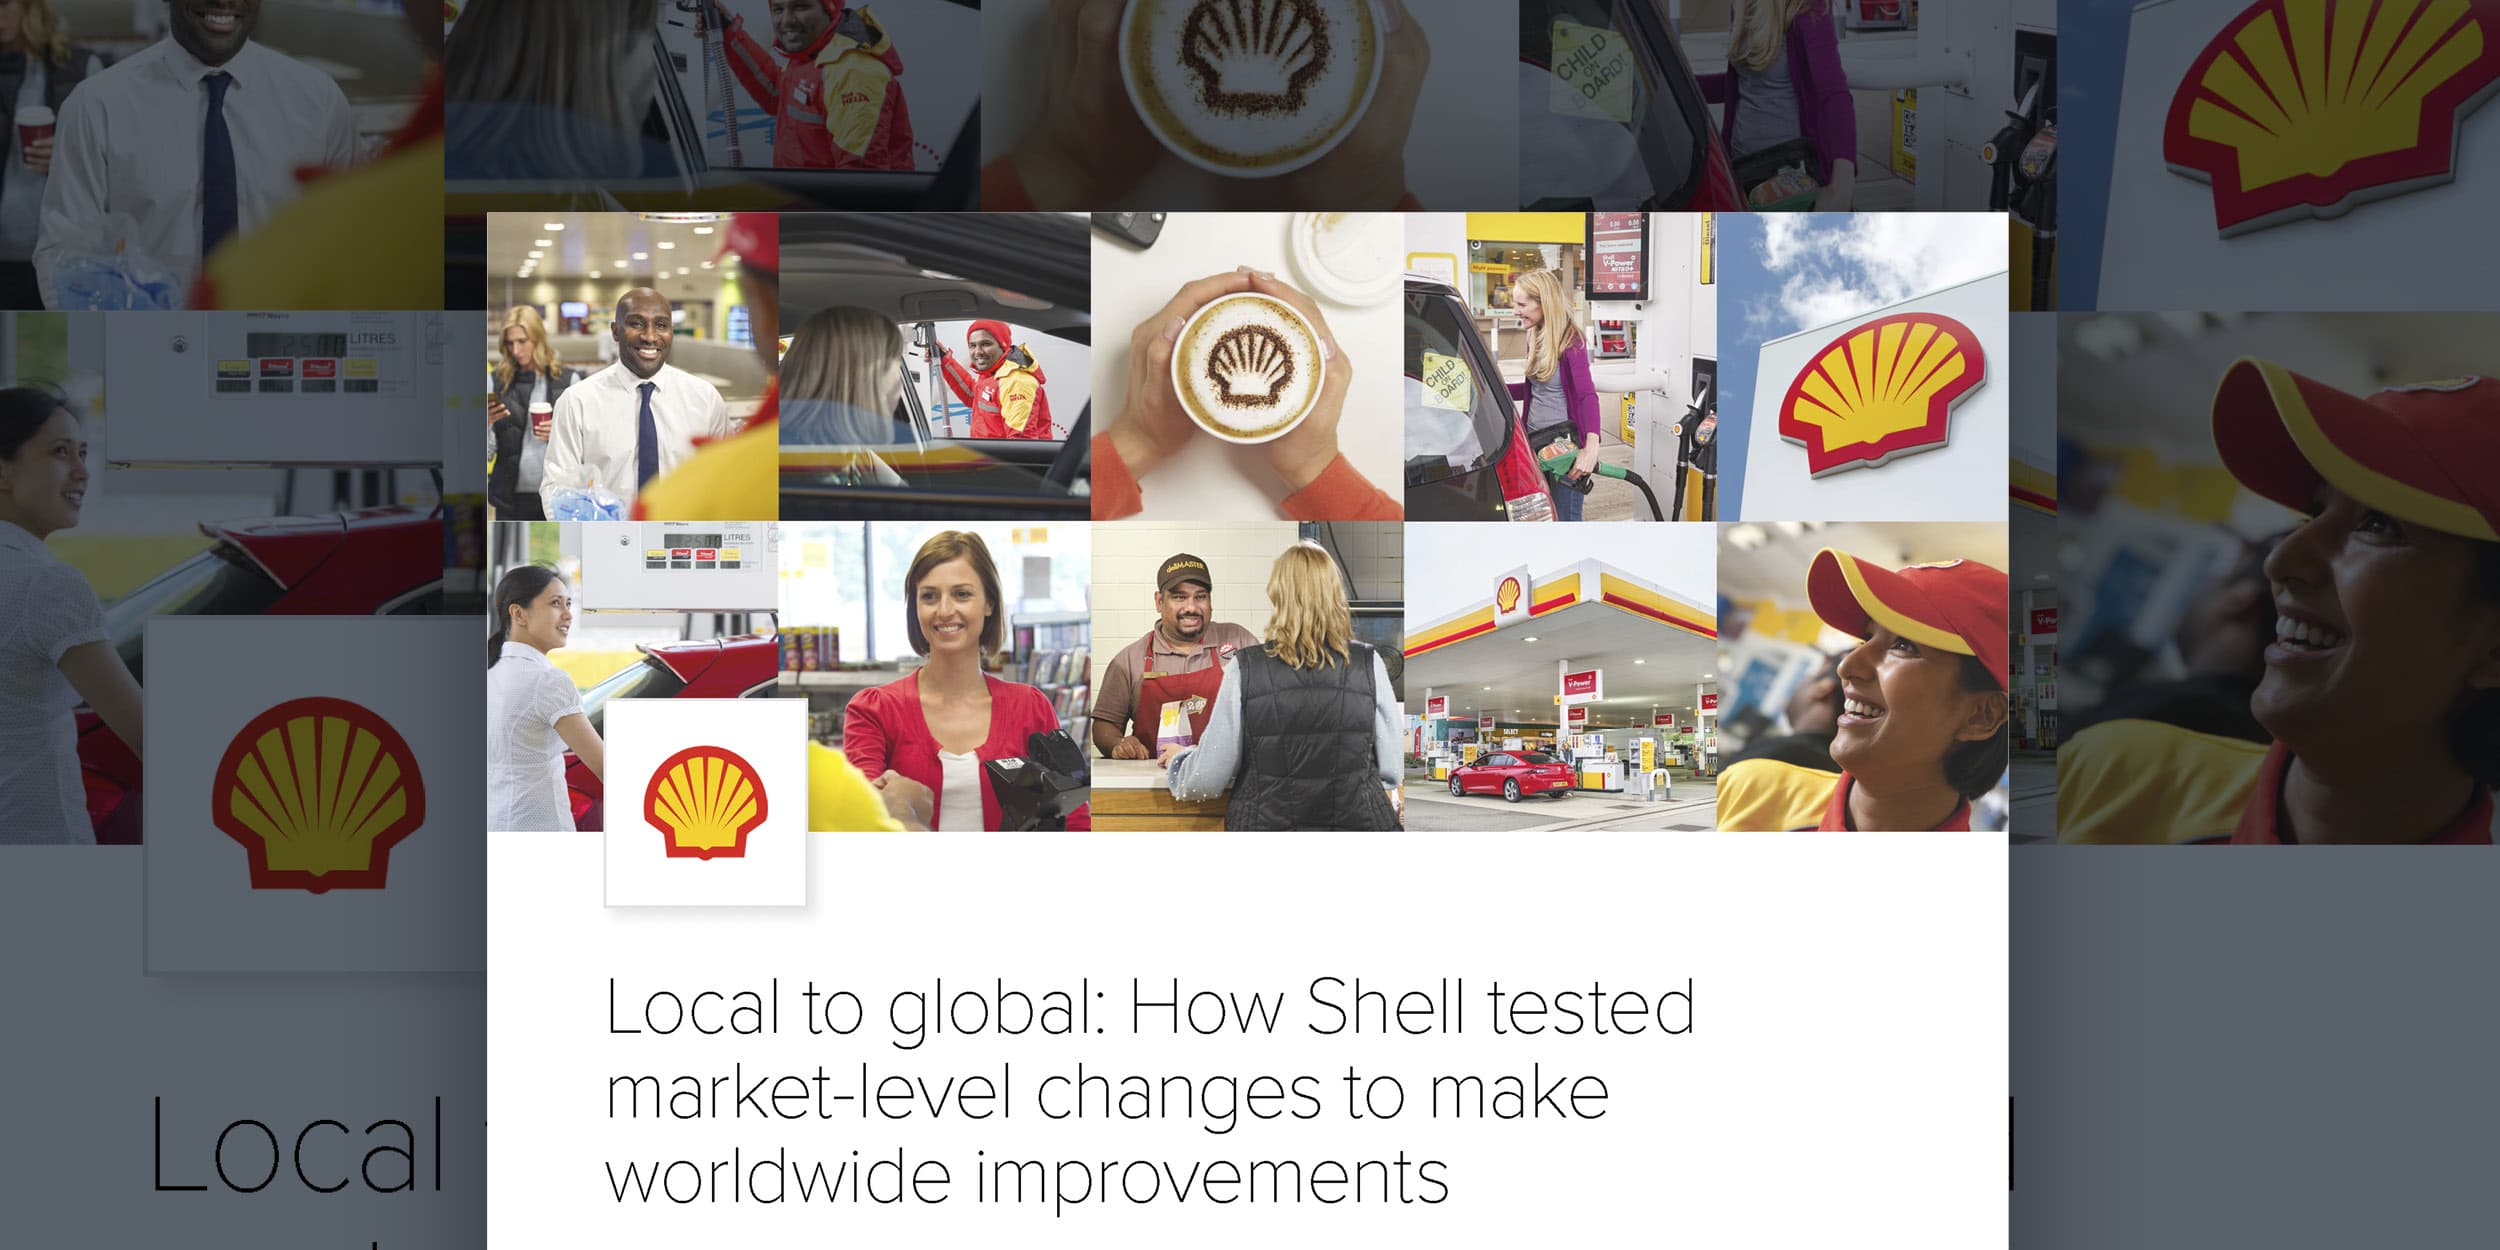 Local to global: How Shell tested market-level changes to make worldwide improvements